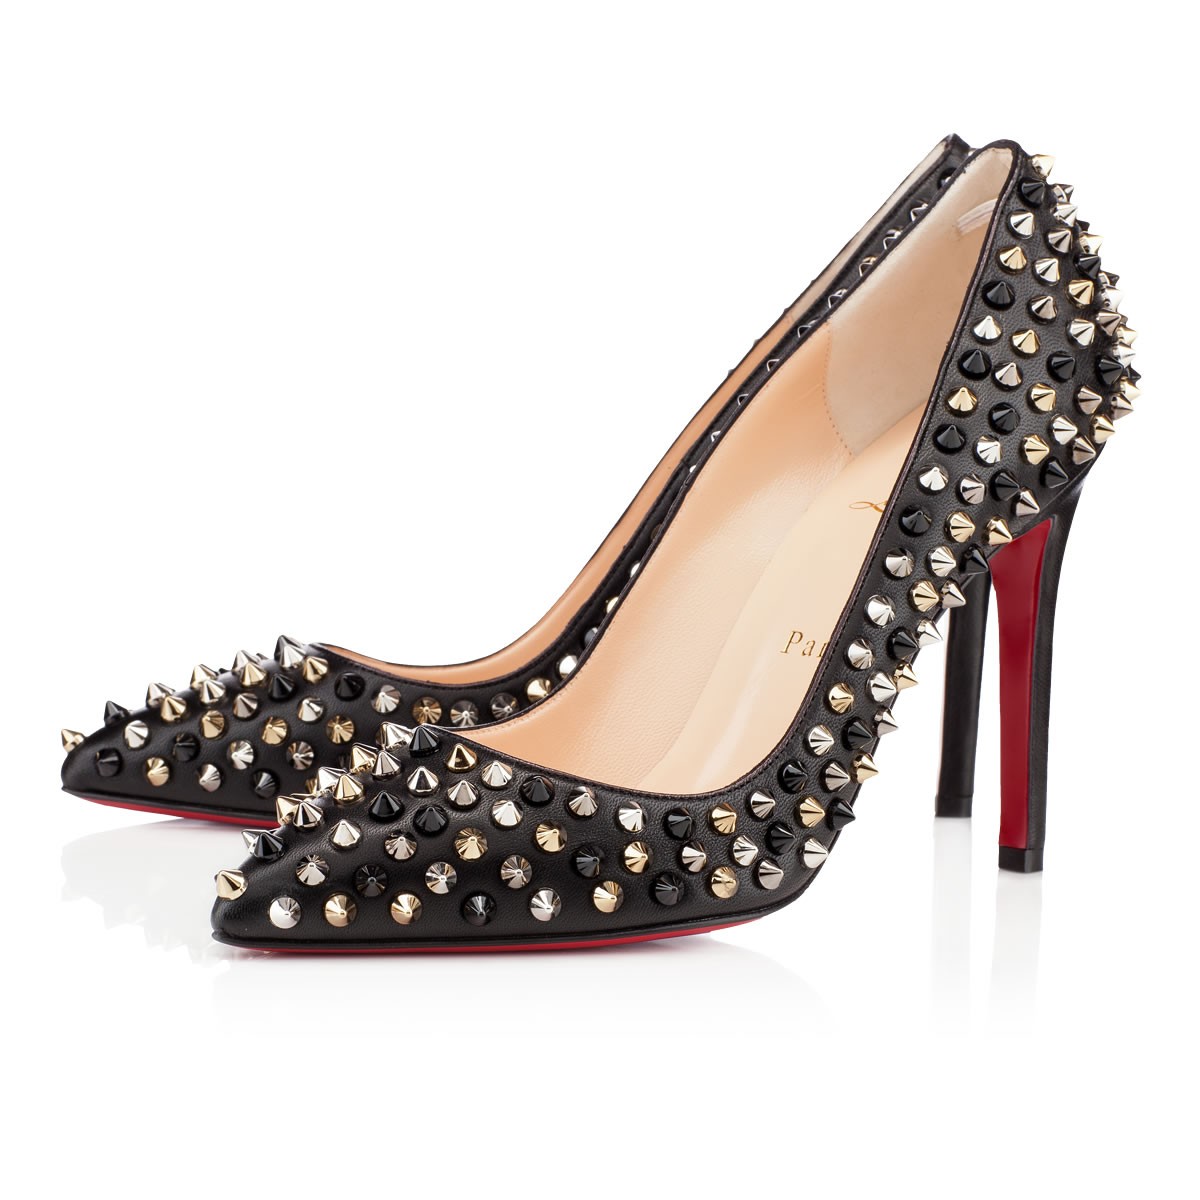 Christian Louboutin  Pigalle Spikes 120mm Pumps Black/Mix